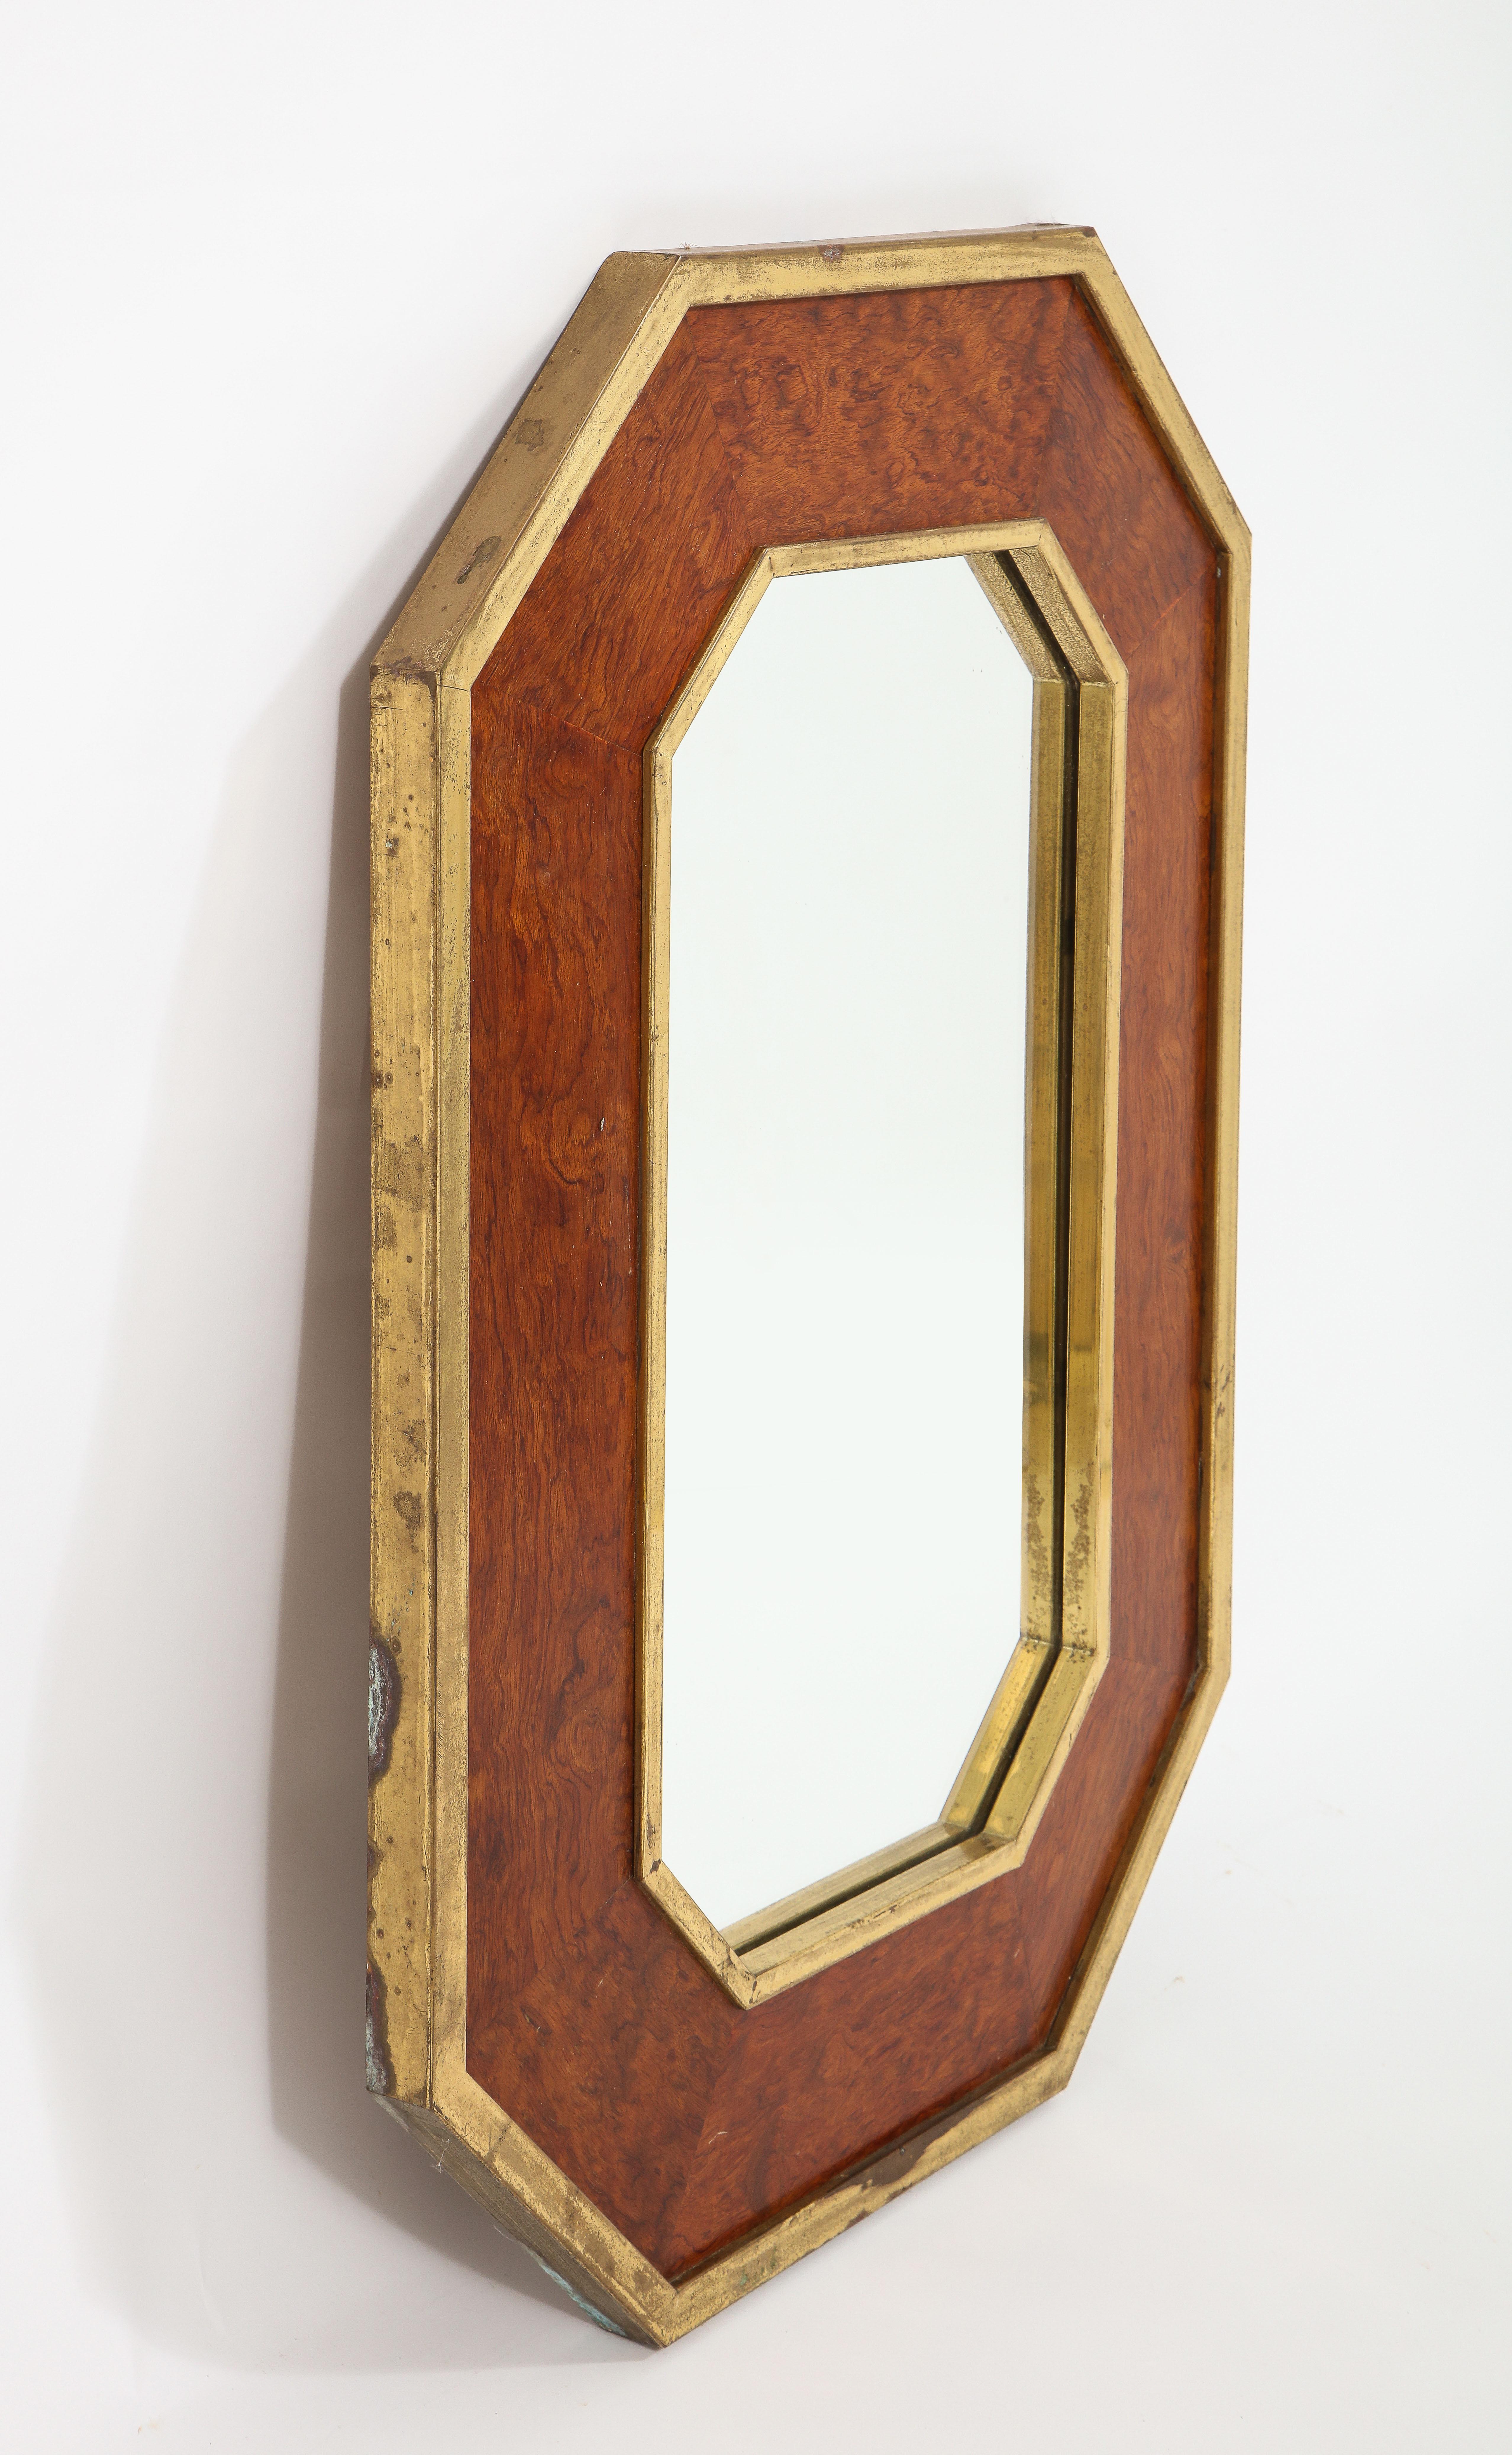 Burl and Brass Neoclassical Revival Octogonal Mirror, France 1960's For Sale 5